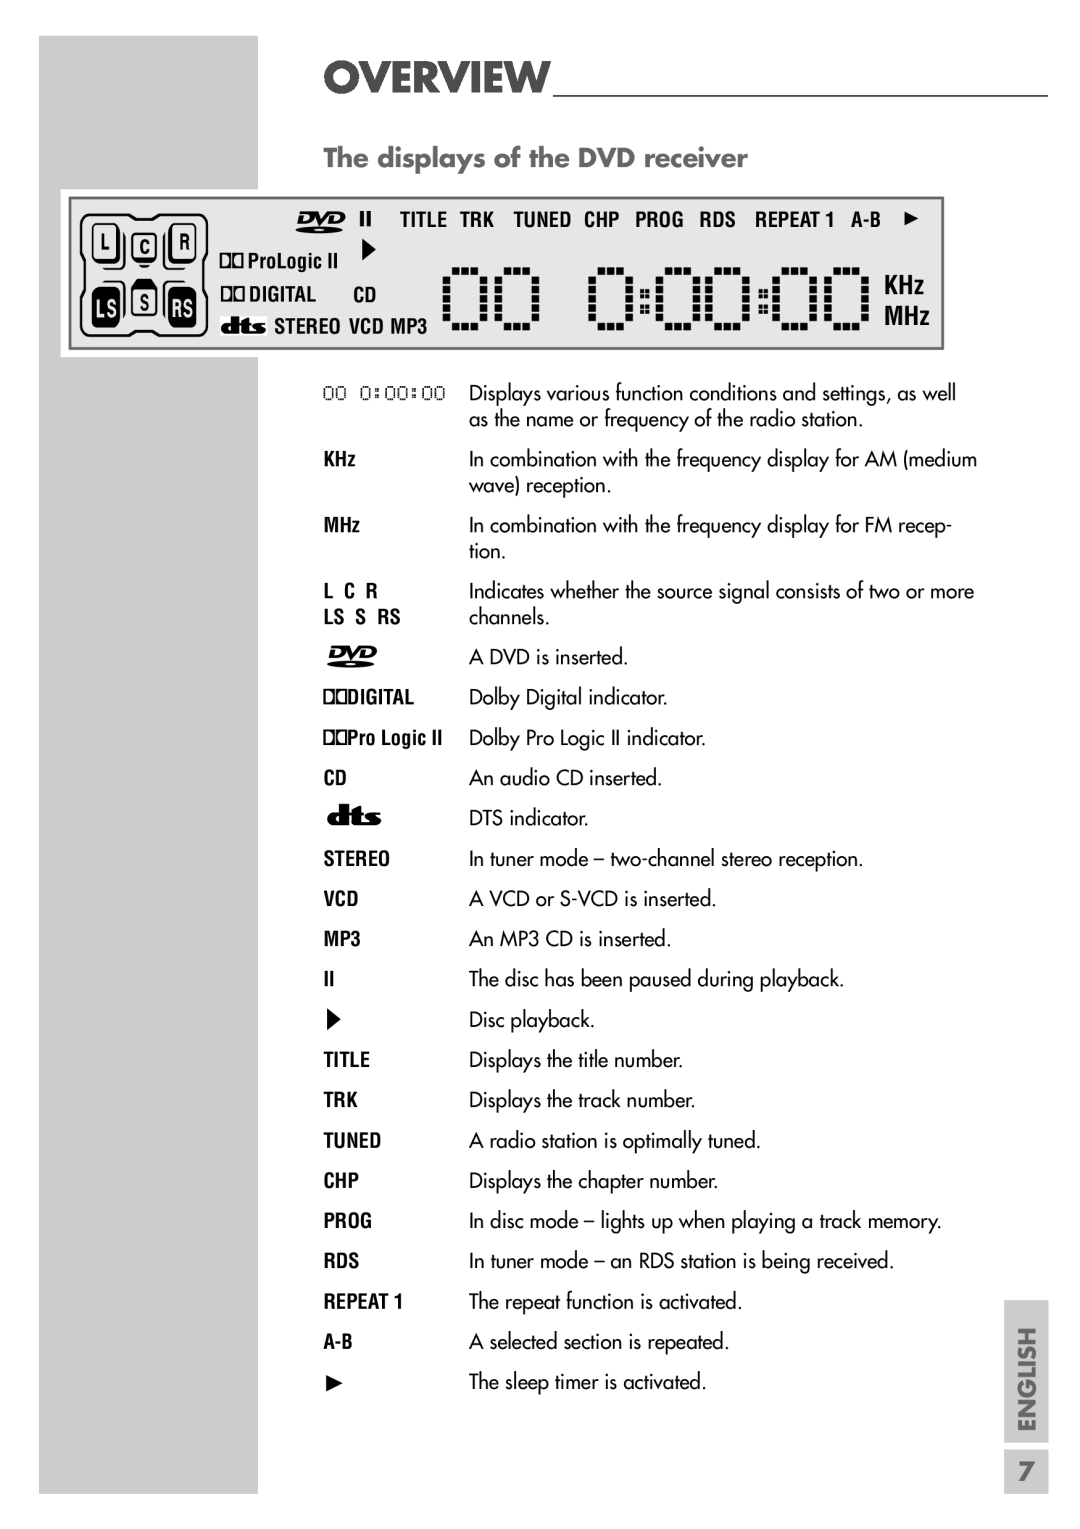 Grundig DR 3400 DD manual The displays of the DVD receiver, wave reception, channels, 00 0 00 00MHz 